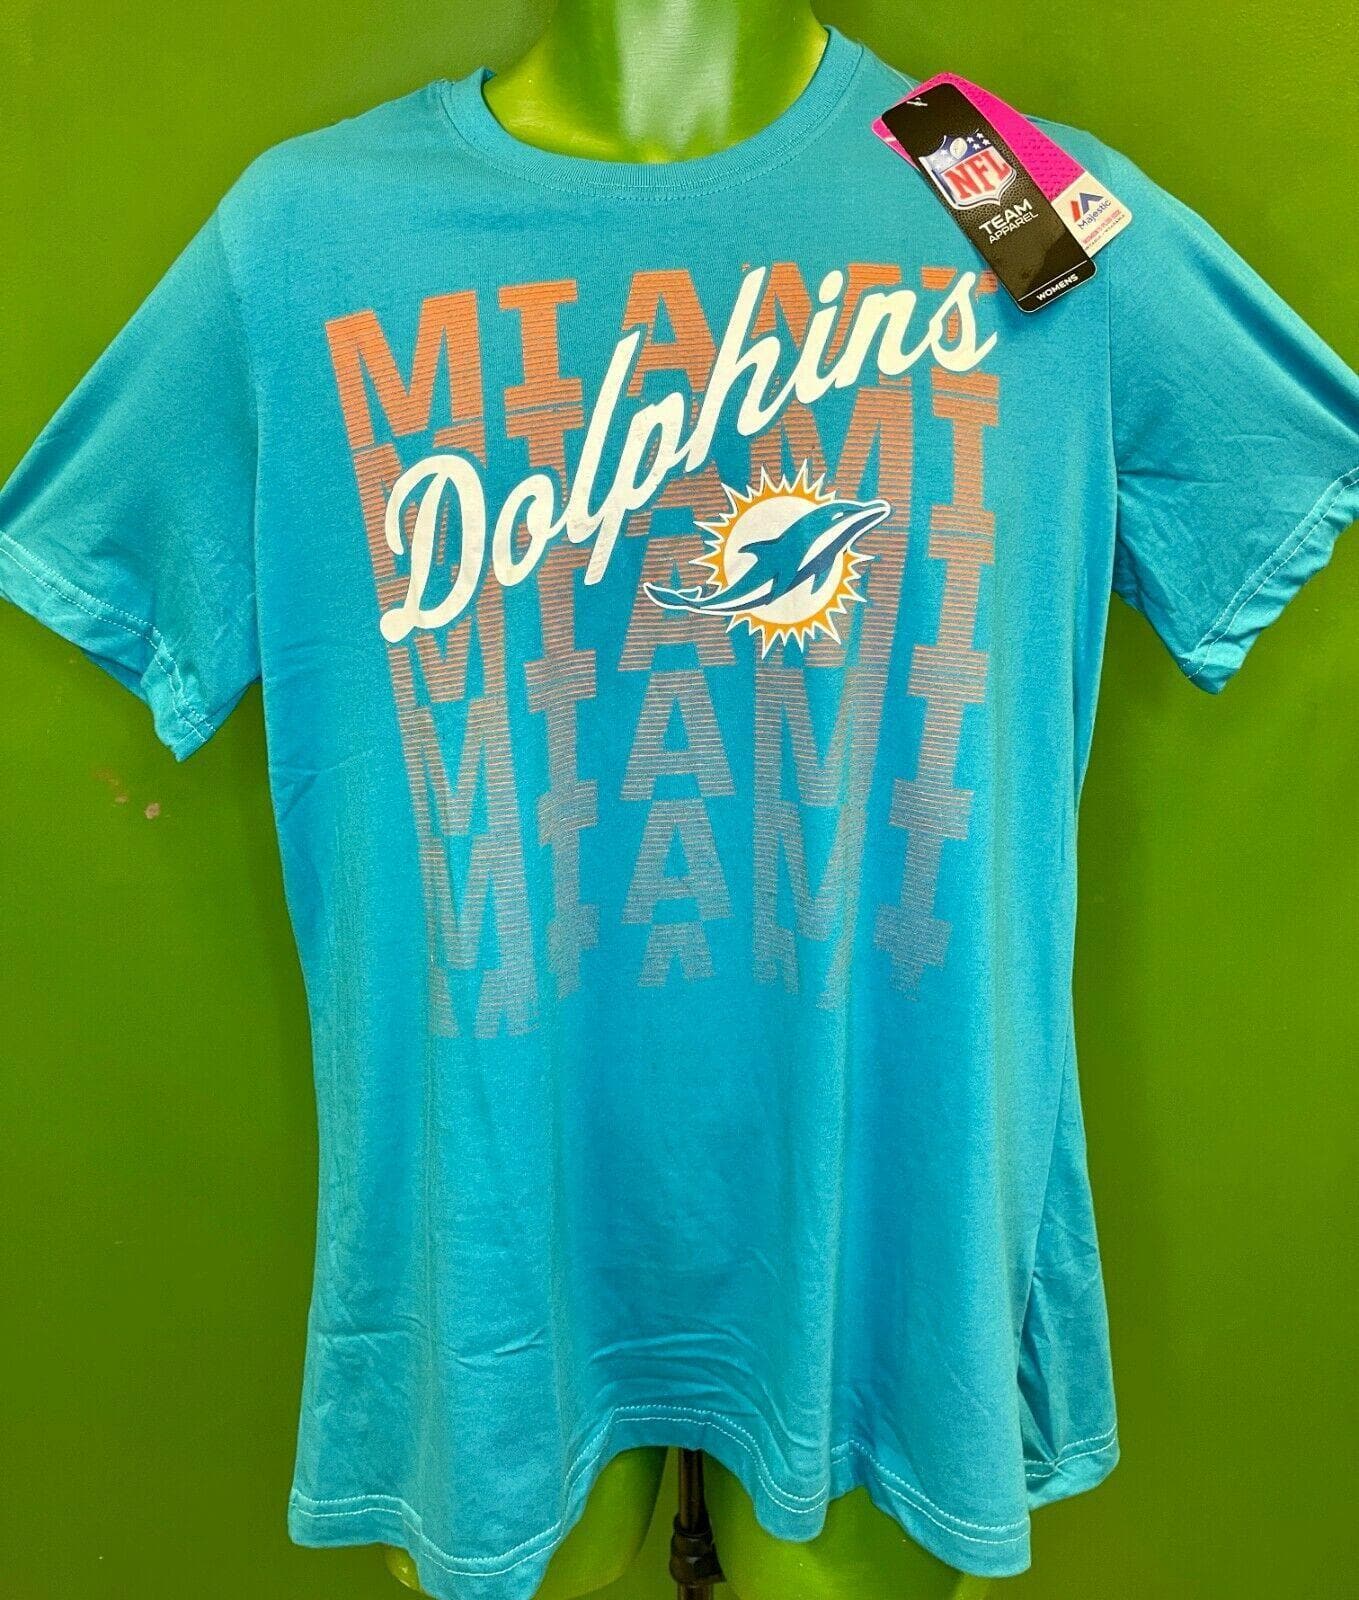 NFL Miami Dolphins Majestic Women's Plus Size T-Shirt Large NWT